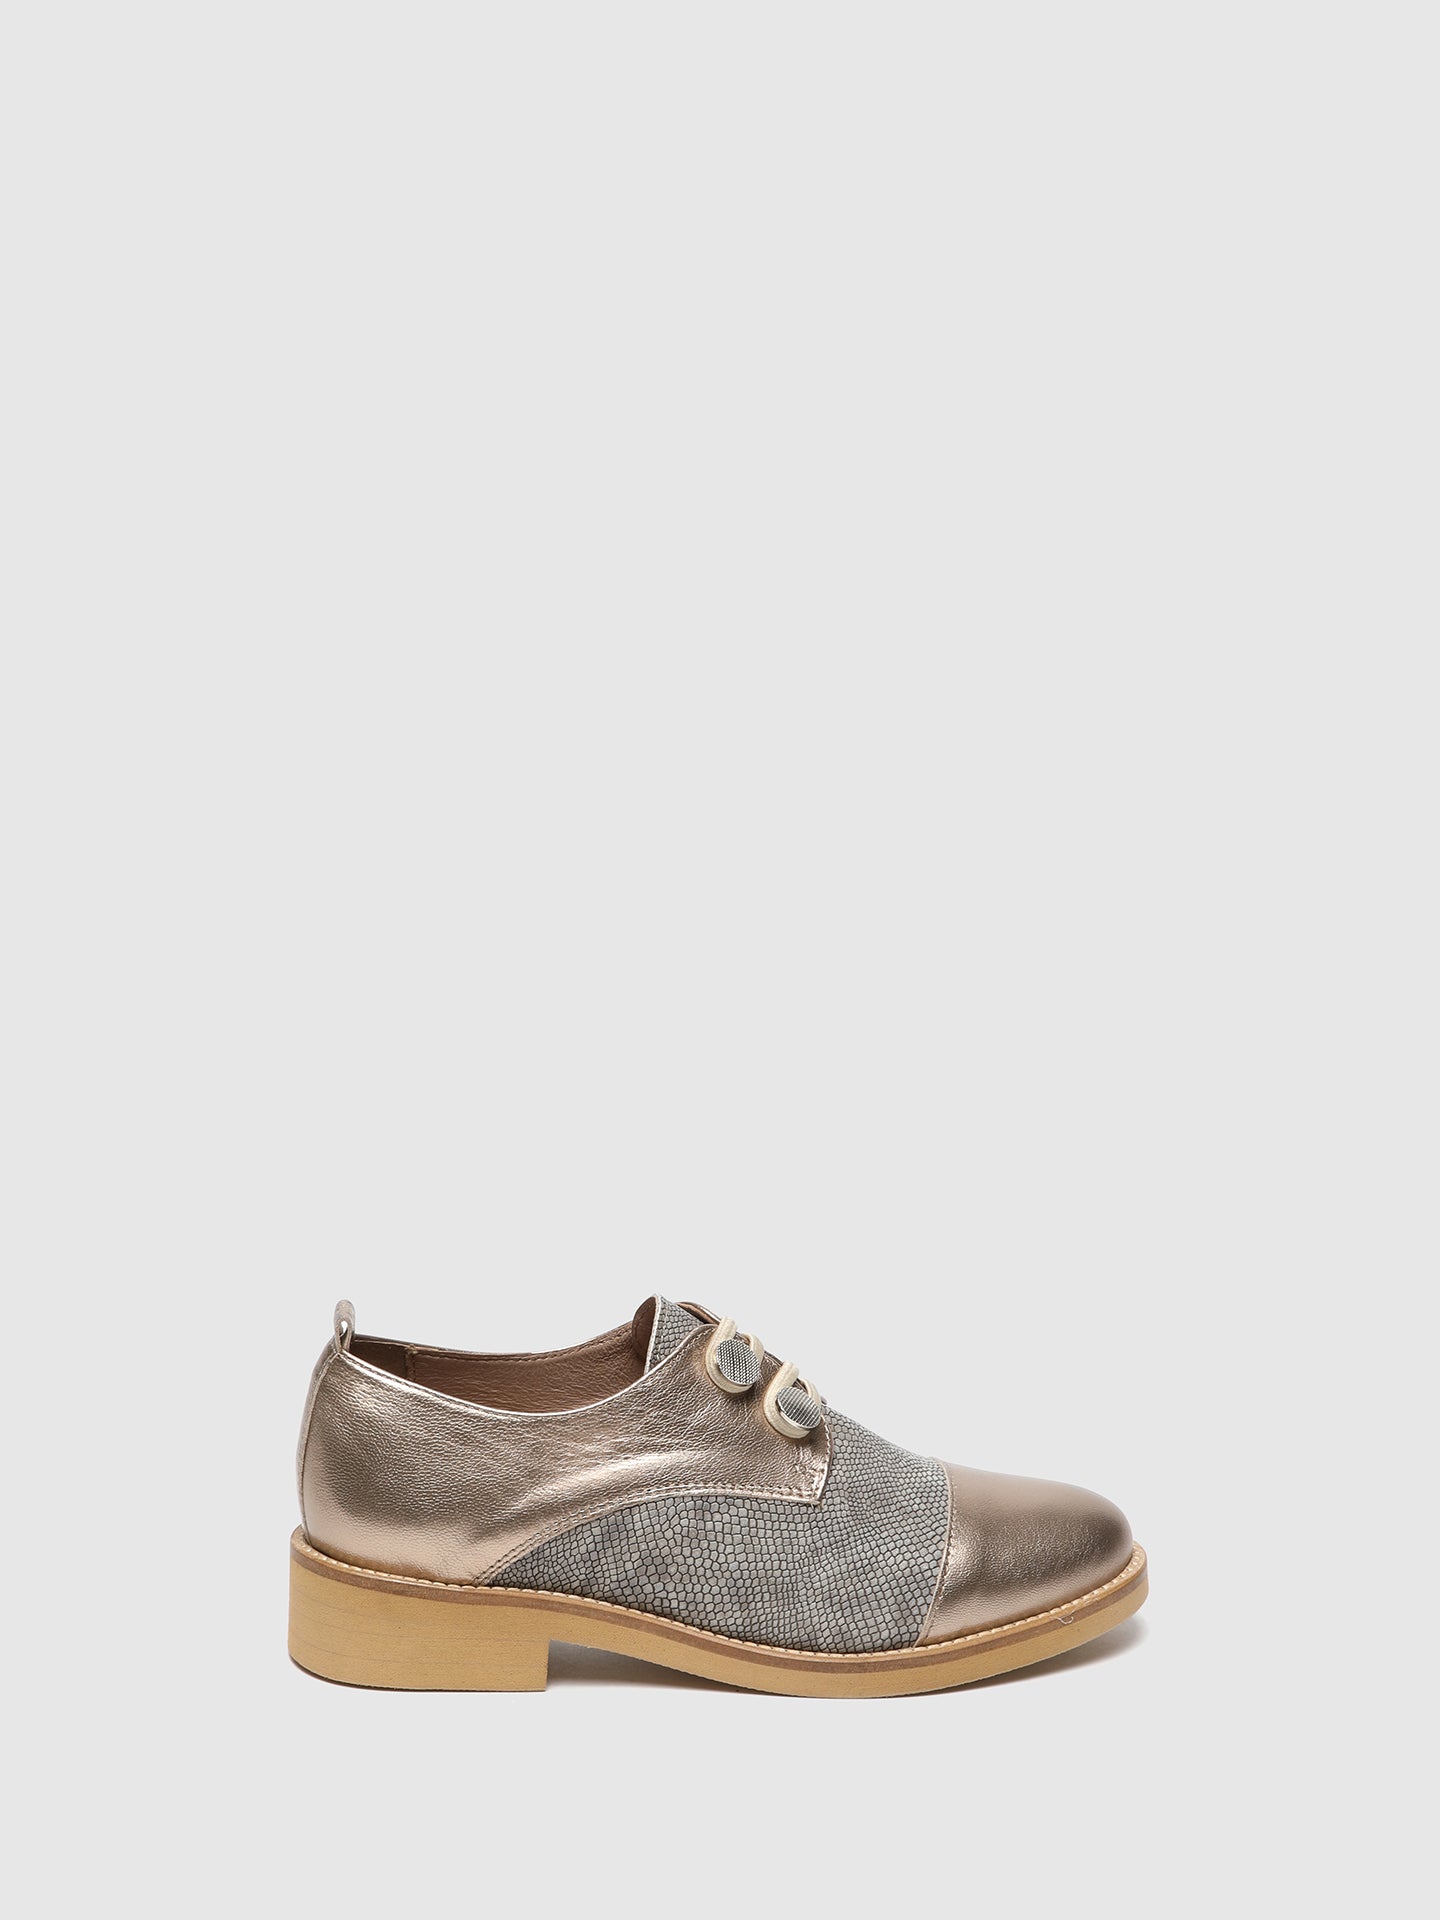 Foreva Gold Derby Shoes